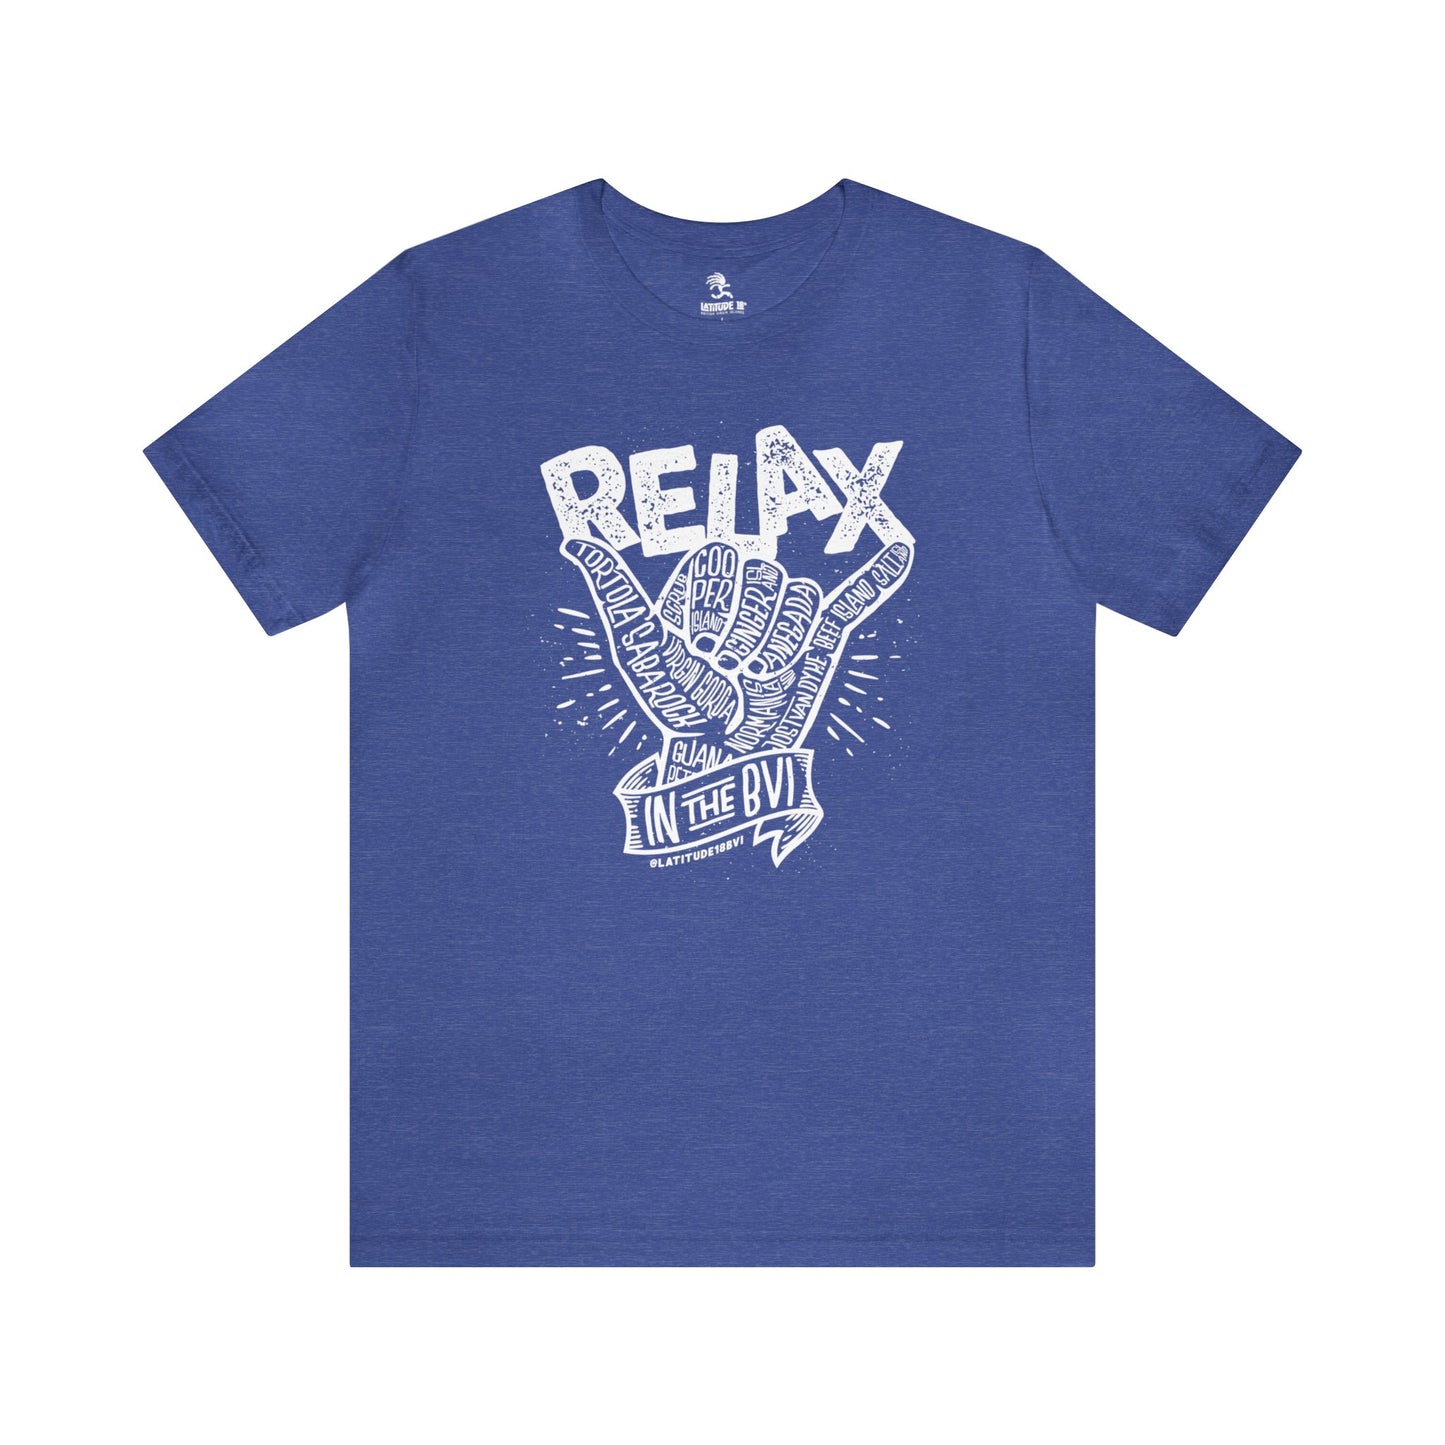 "Relax in the BVI" Unisex S/S Tee